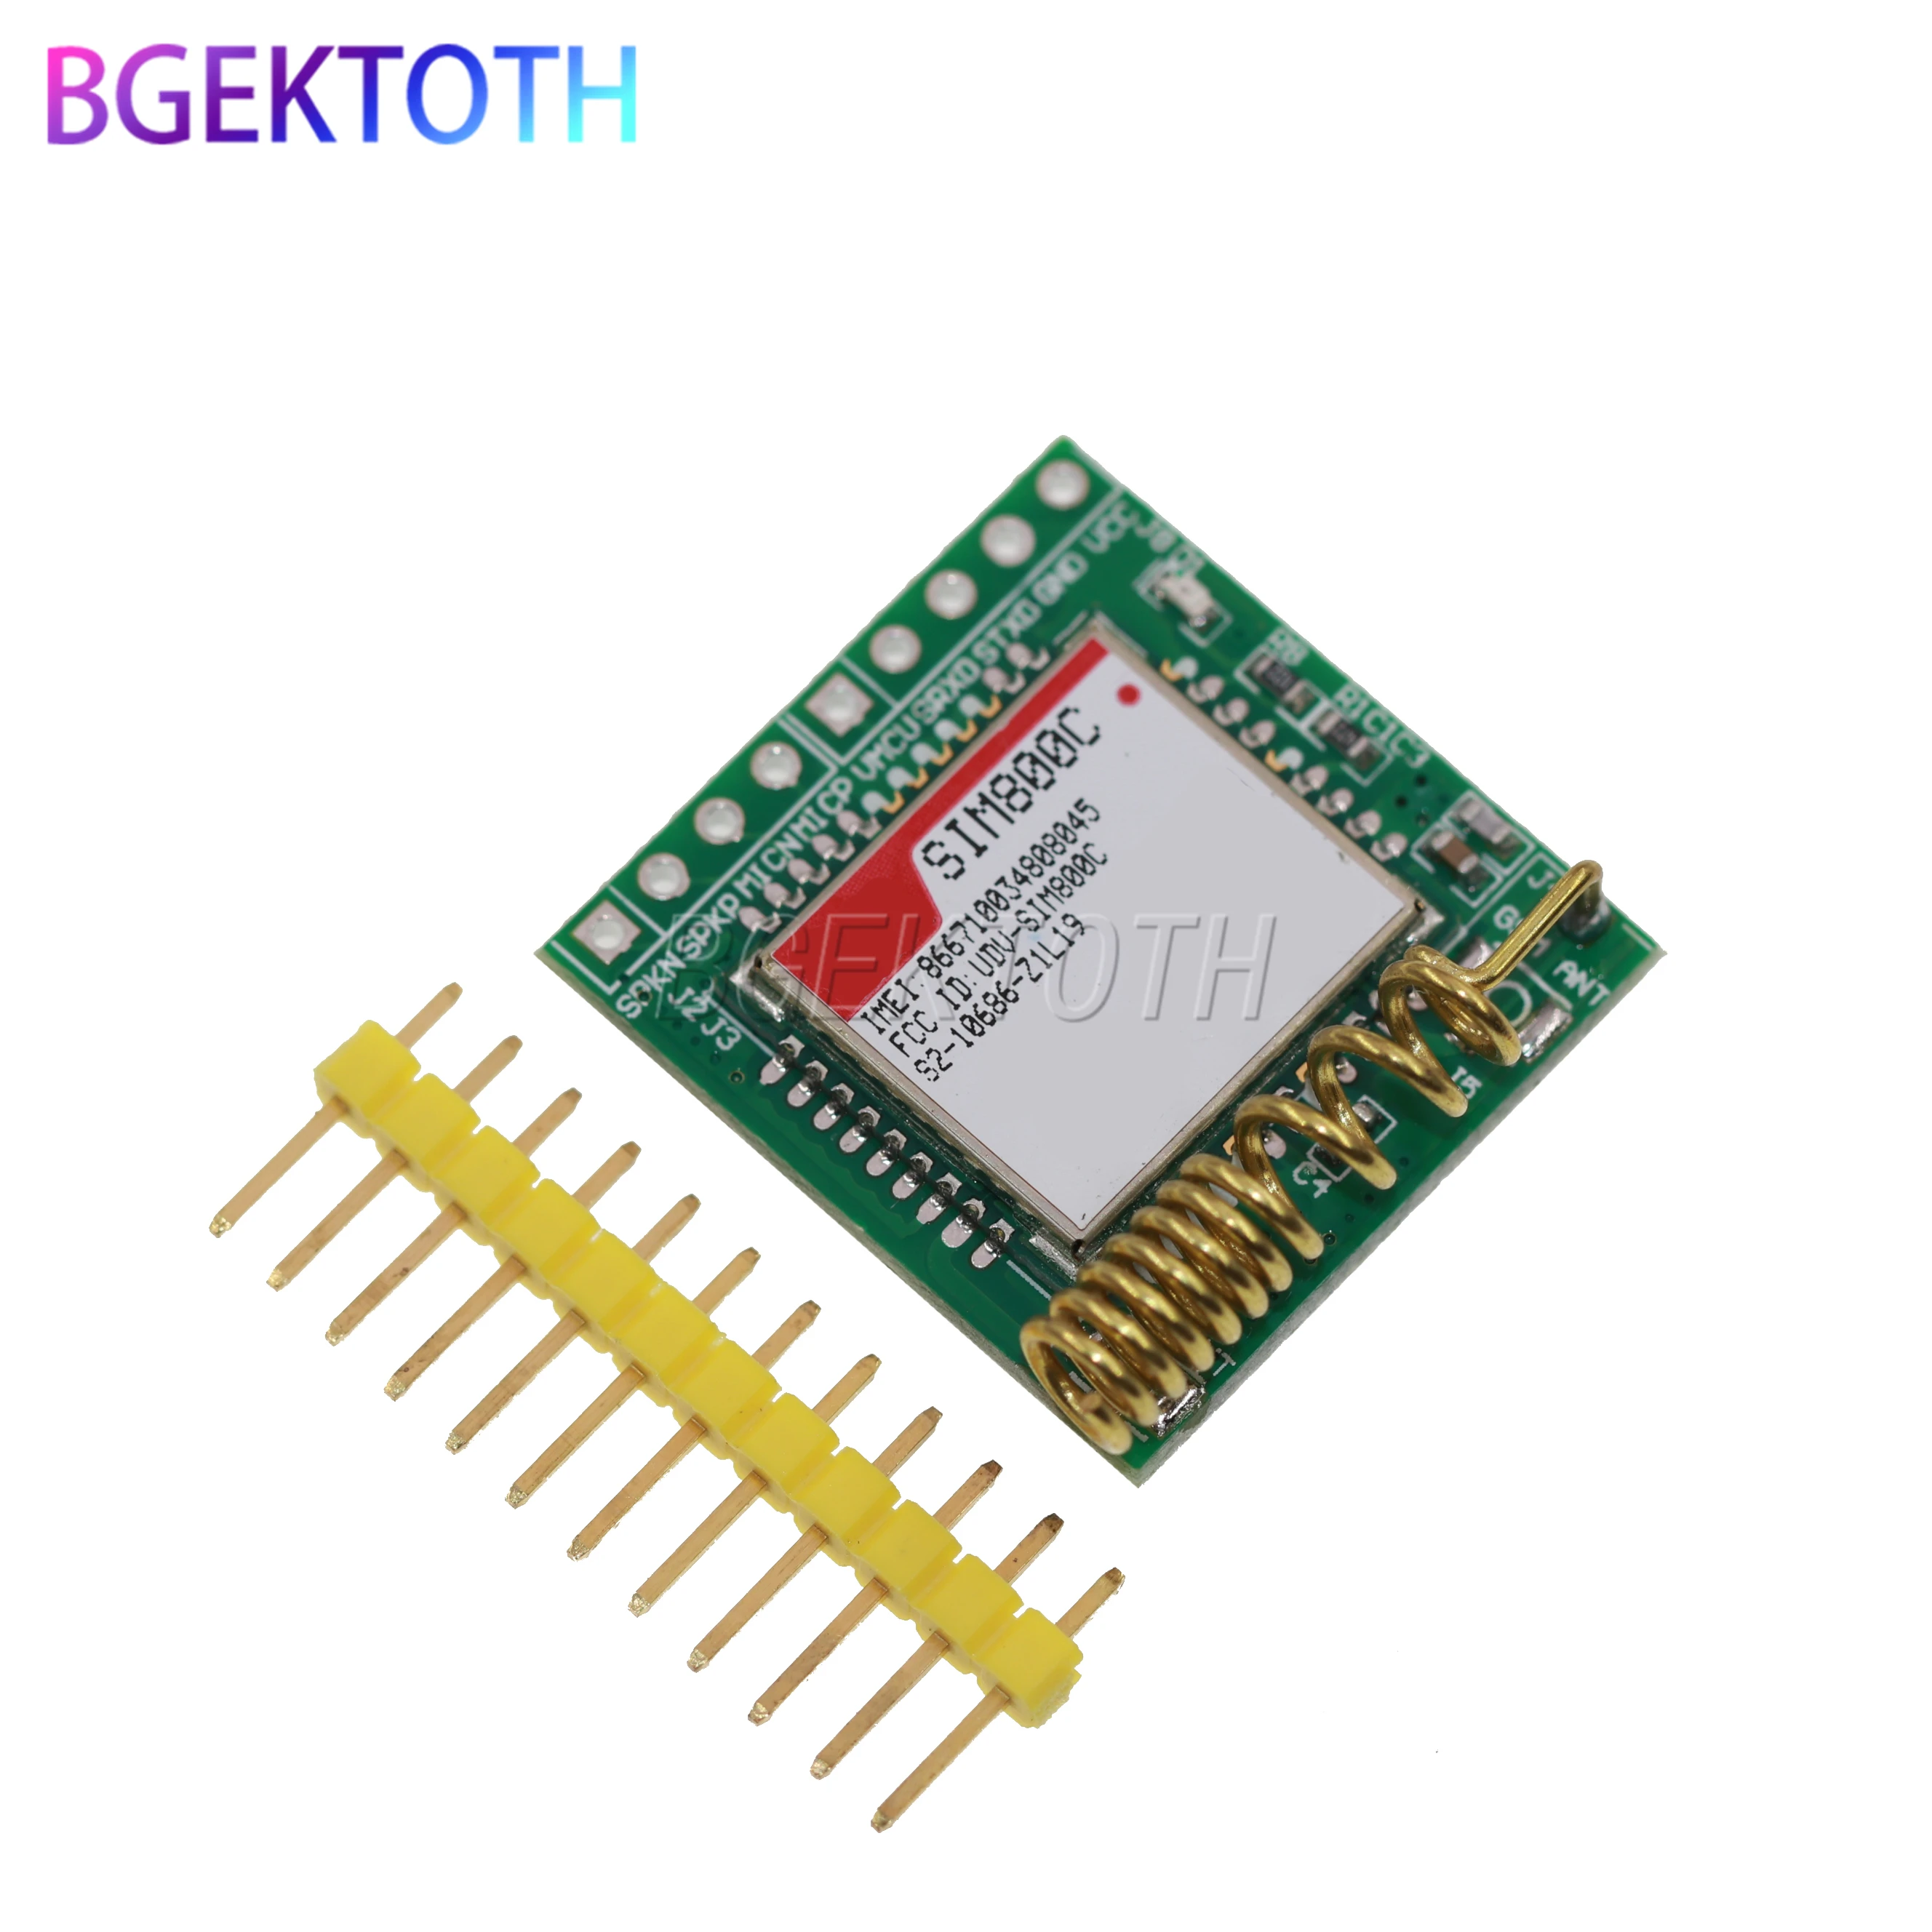 

SIM800C GSM GPRS module STM32 microcontroller 51 equipped with Bluetooth and high- TTS weld